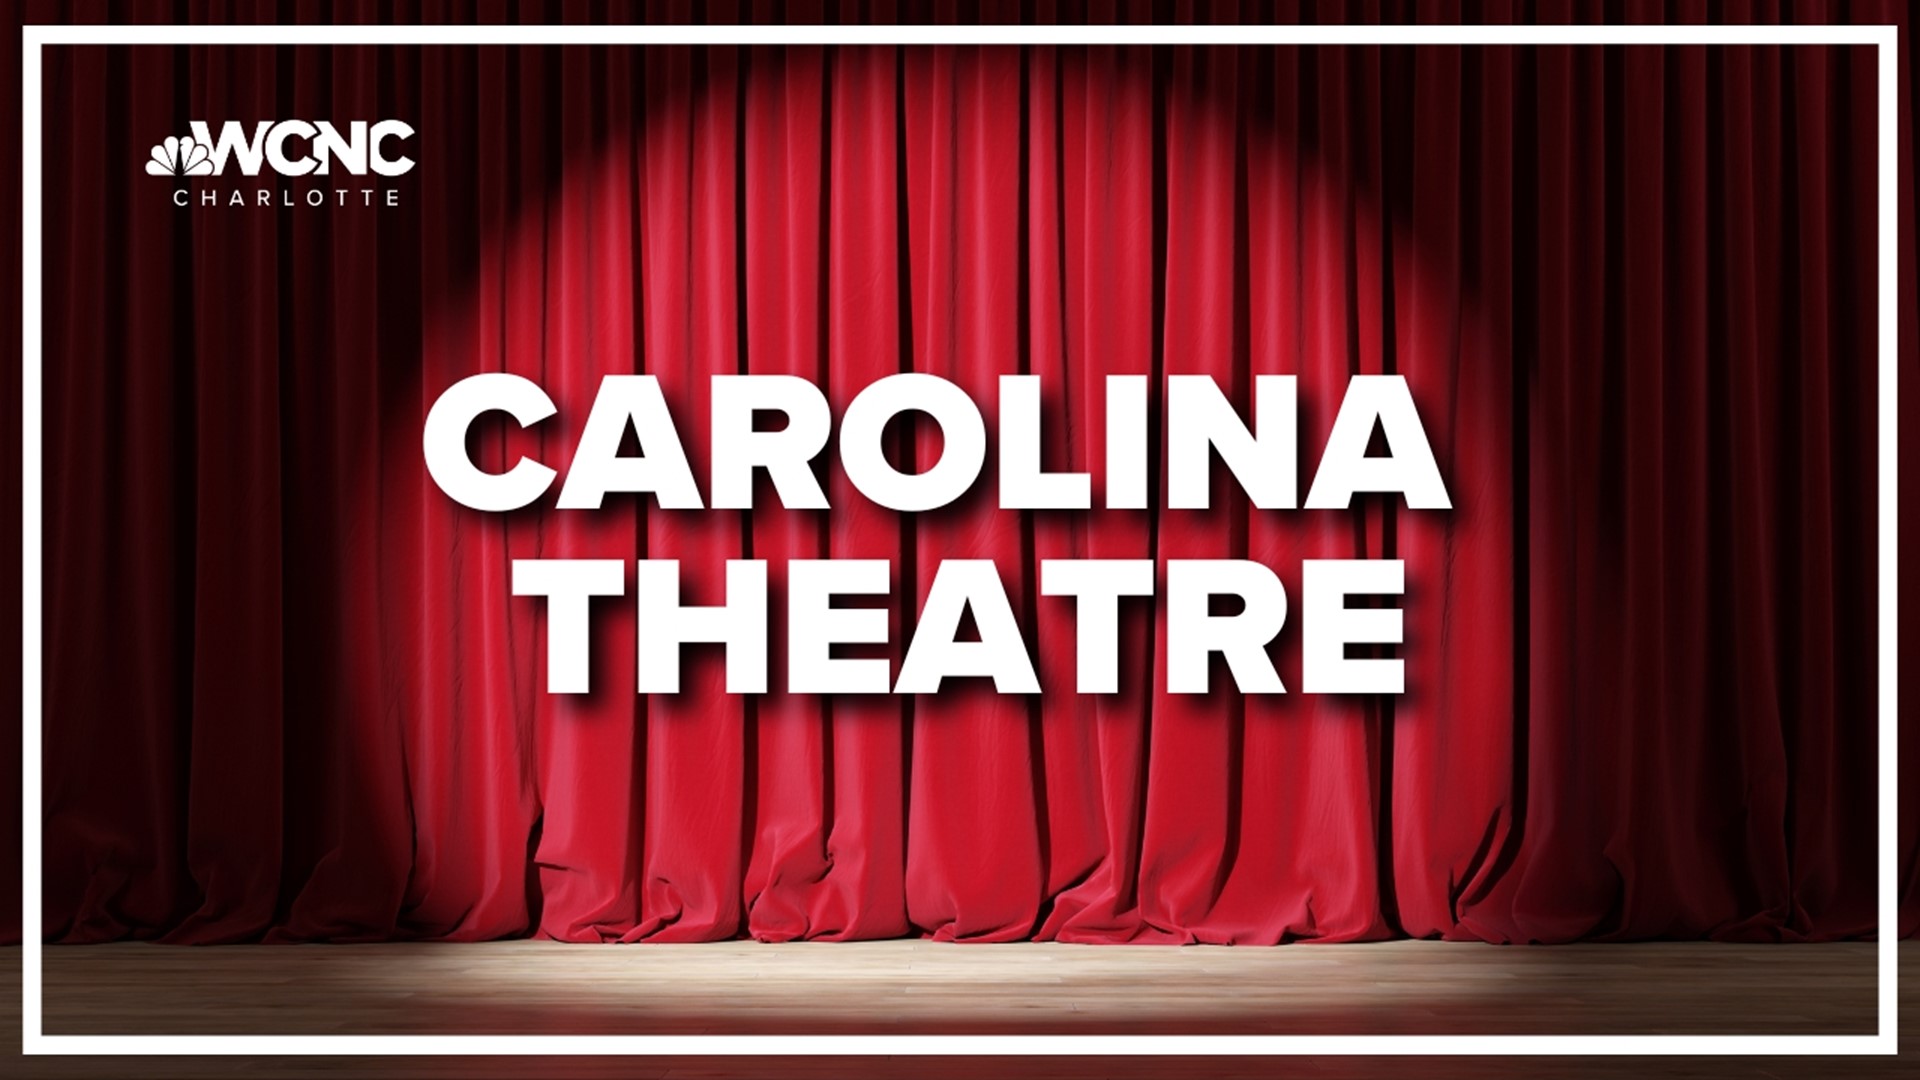 Once known as "The Cathedral of Entertainment," the Carolina Theatre is getting a second chance after sitting dormant for decades.